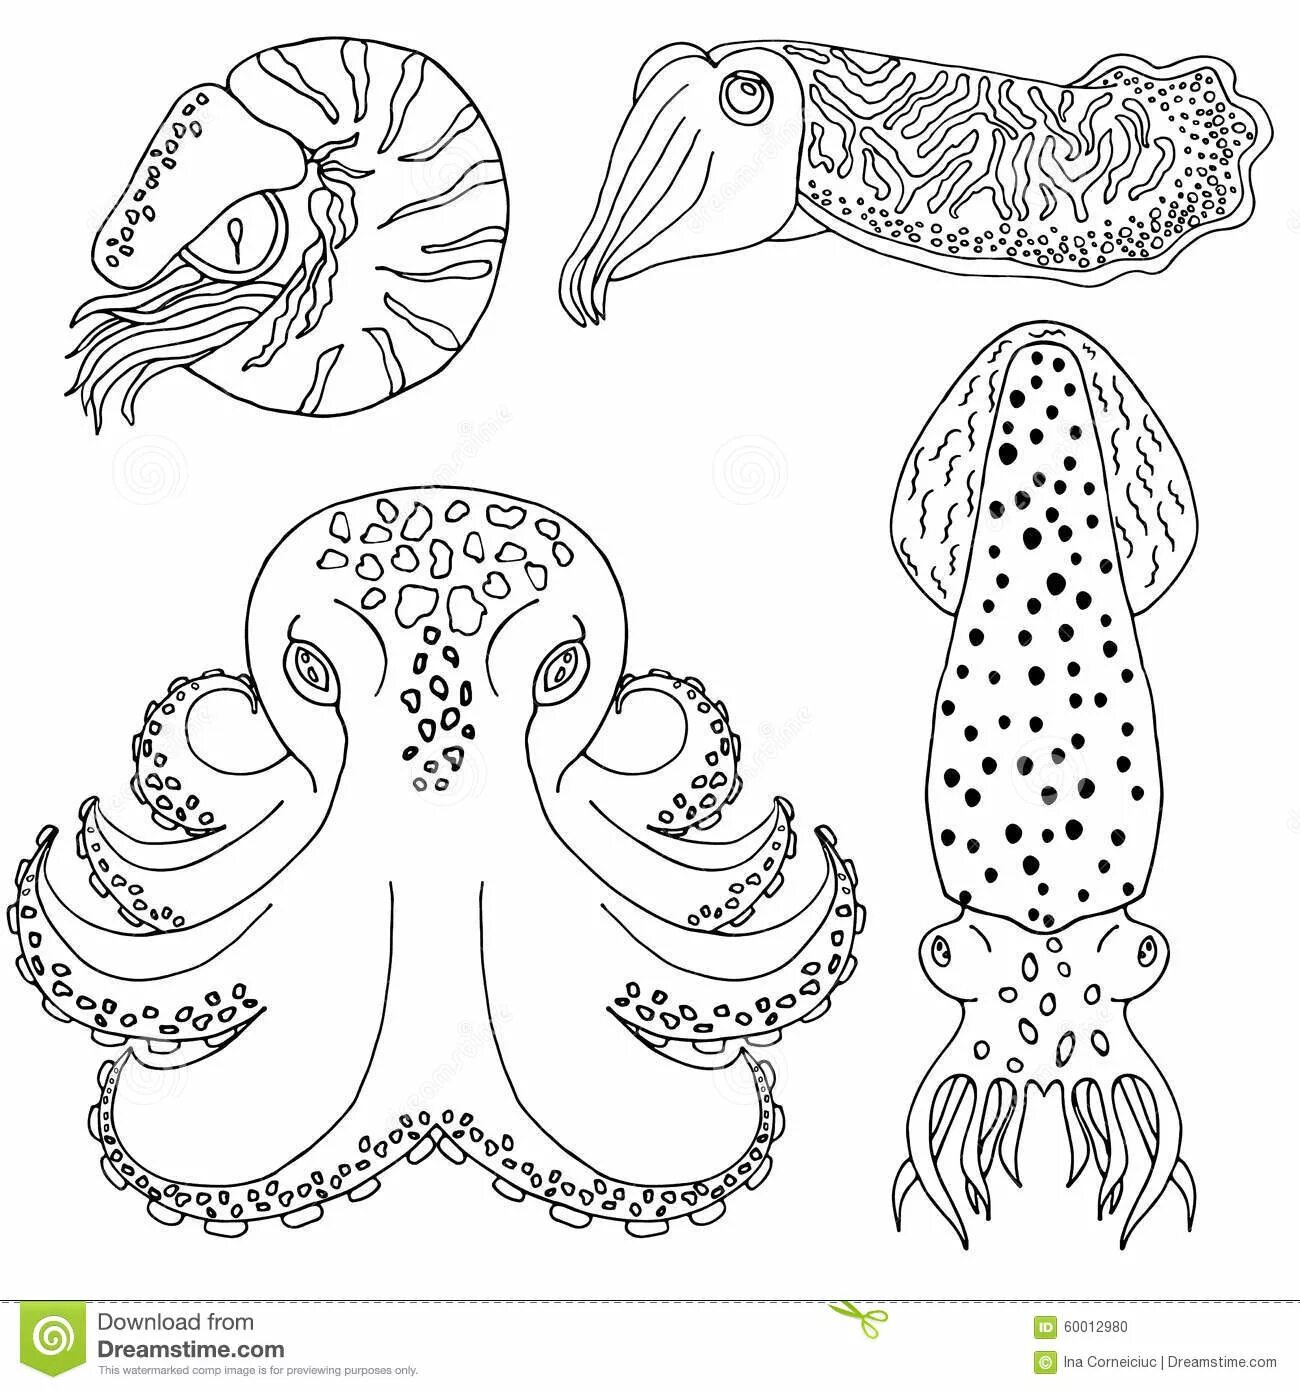 Coloring book graceful cuttlefish